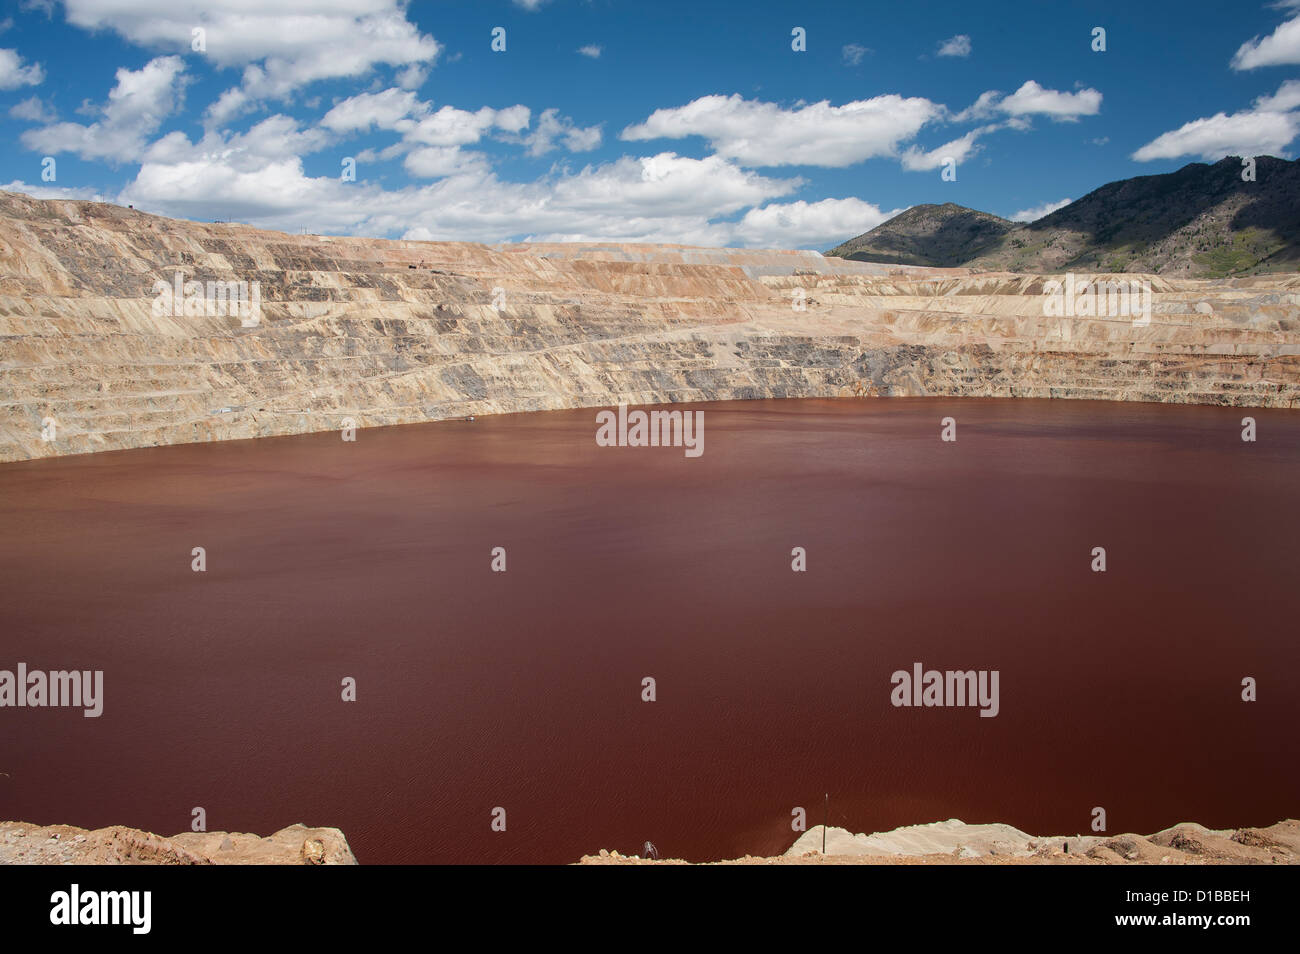 The discolored water of the Berkeley Pit in Butte, Montana.  The water is contaminated from the minerals in the open pit mining. Stock Photo